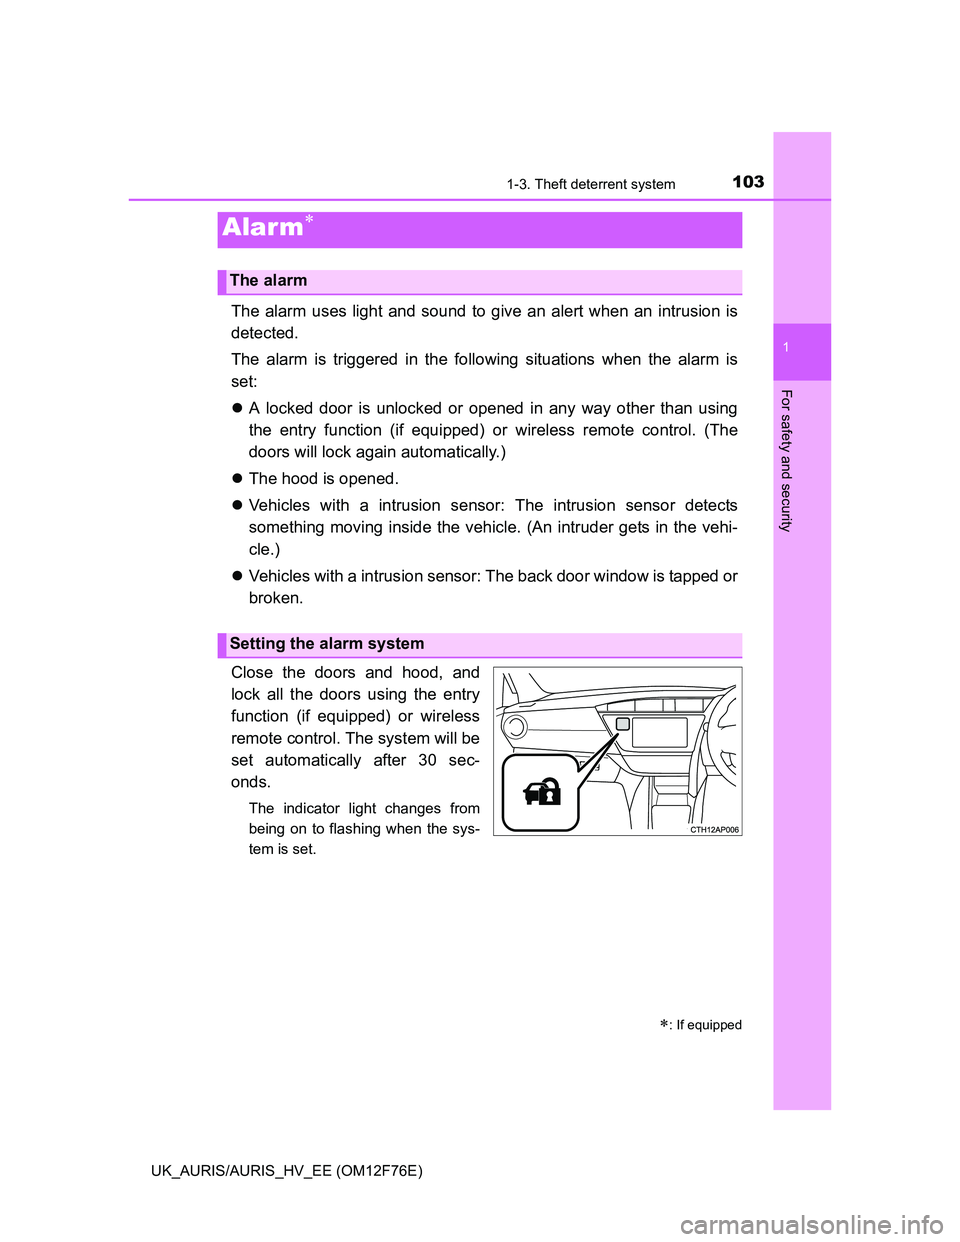 TOYOTA AURIS 2013  Owners Manual (in English) 1031-3. Theft deterrent system
1
For safety and security
UK_AURIS/AURIS_HV_EE (OM12F76E)
The alarm uses light and sound to give an alert when an intrusion is
detected.
The alarm is triggered in the fo